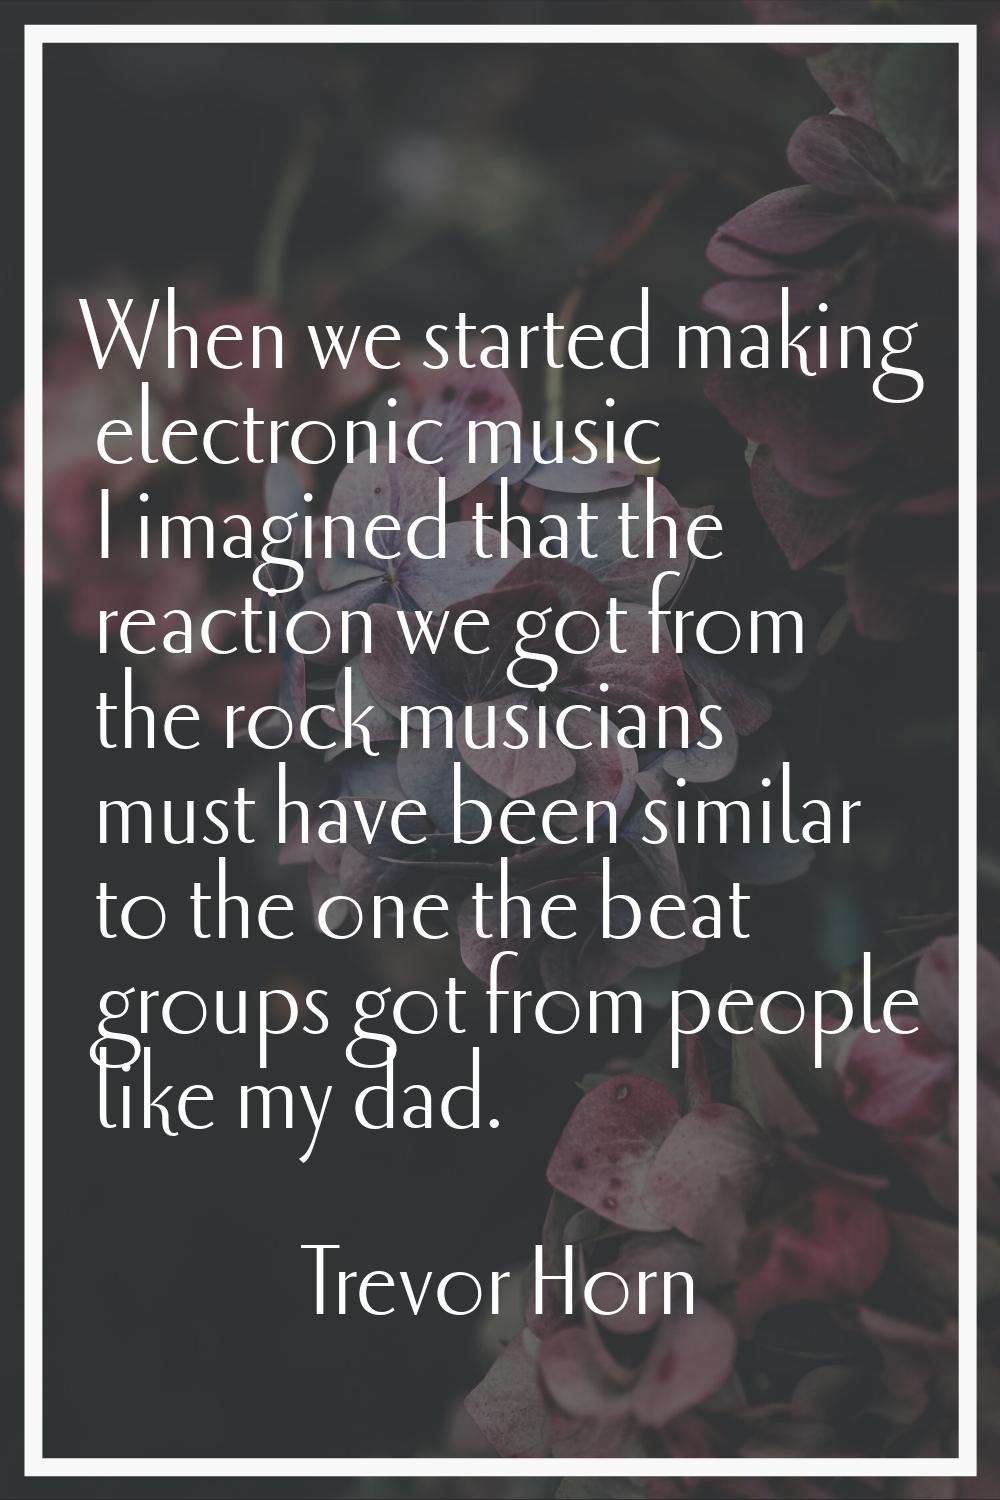 When we started making electronic music I imagined that the reaction we got from the rock musicians